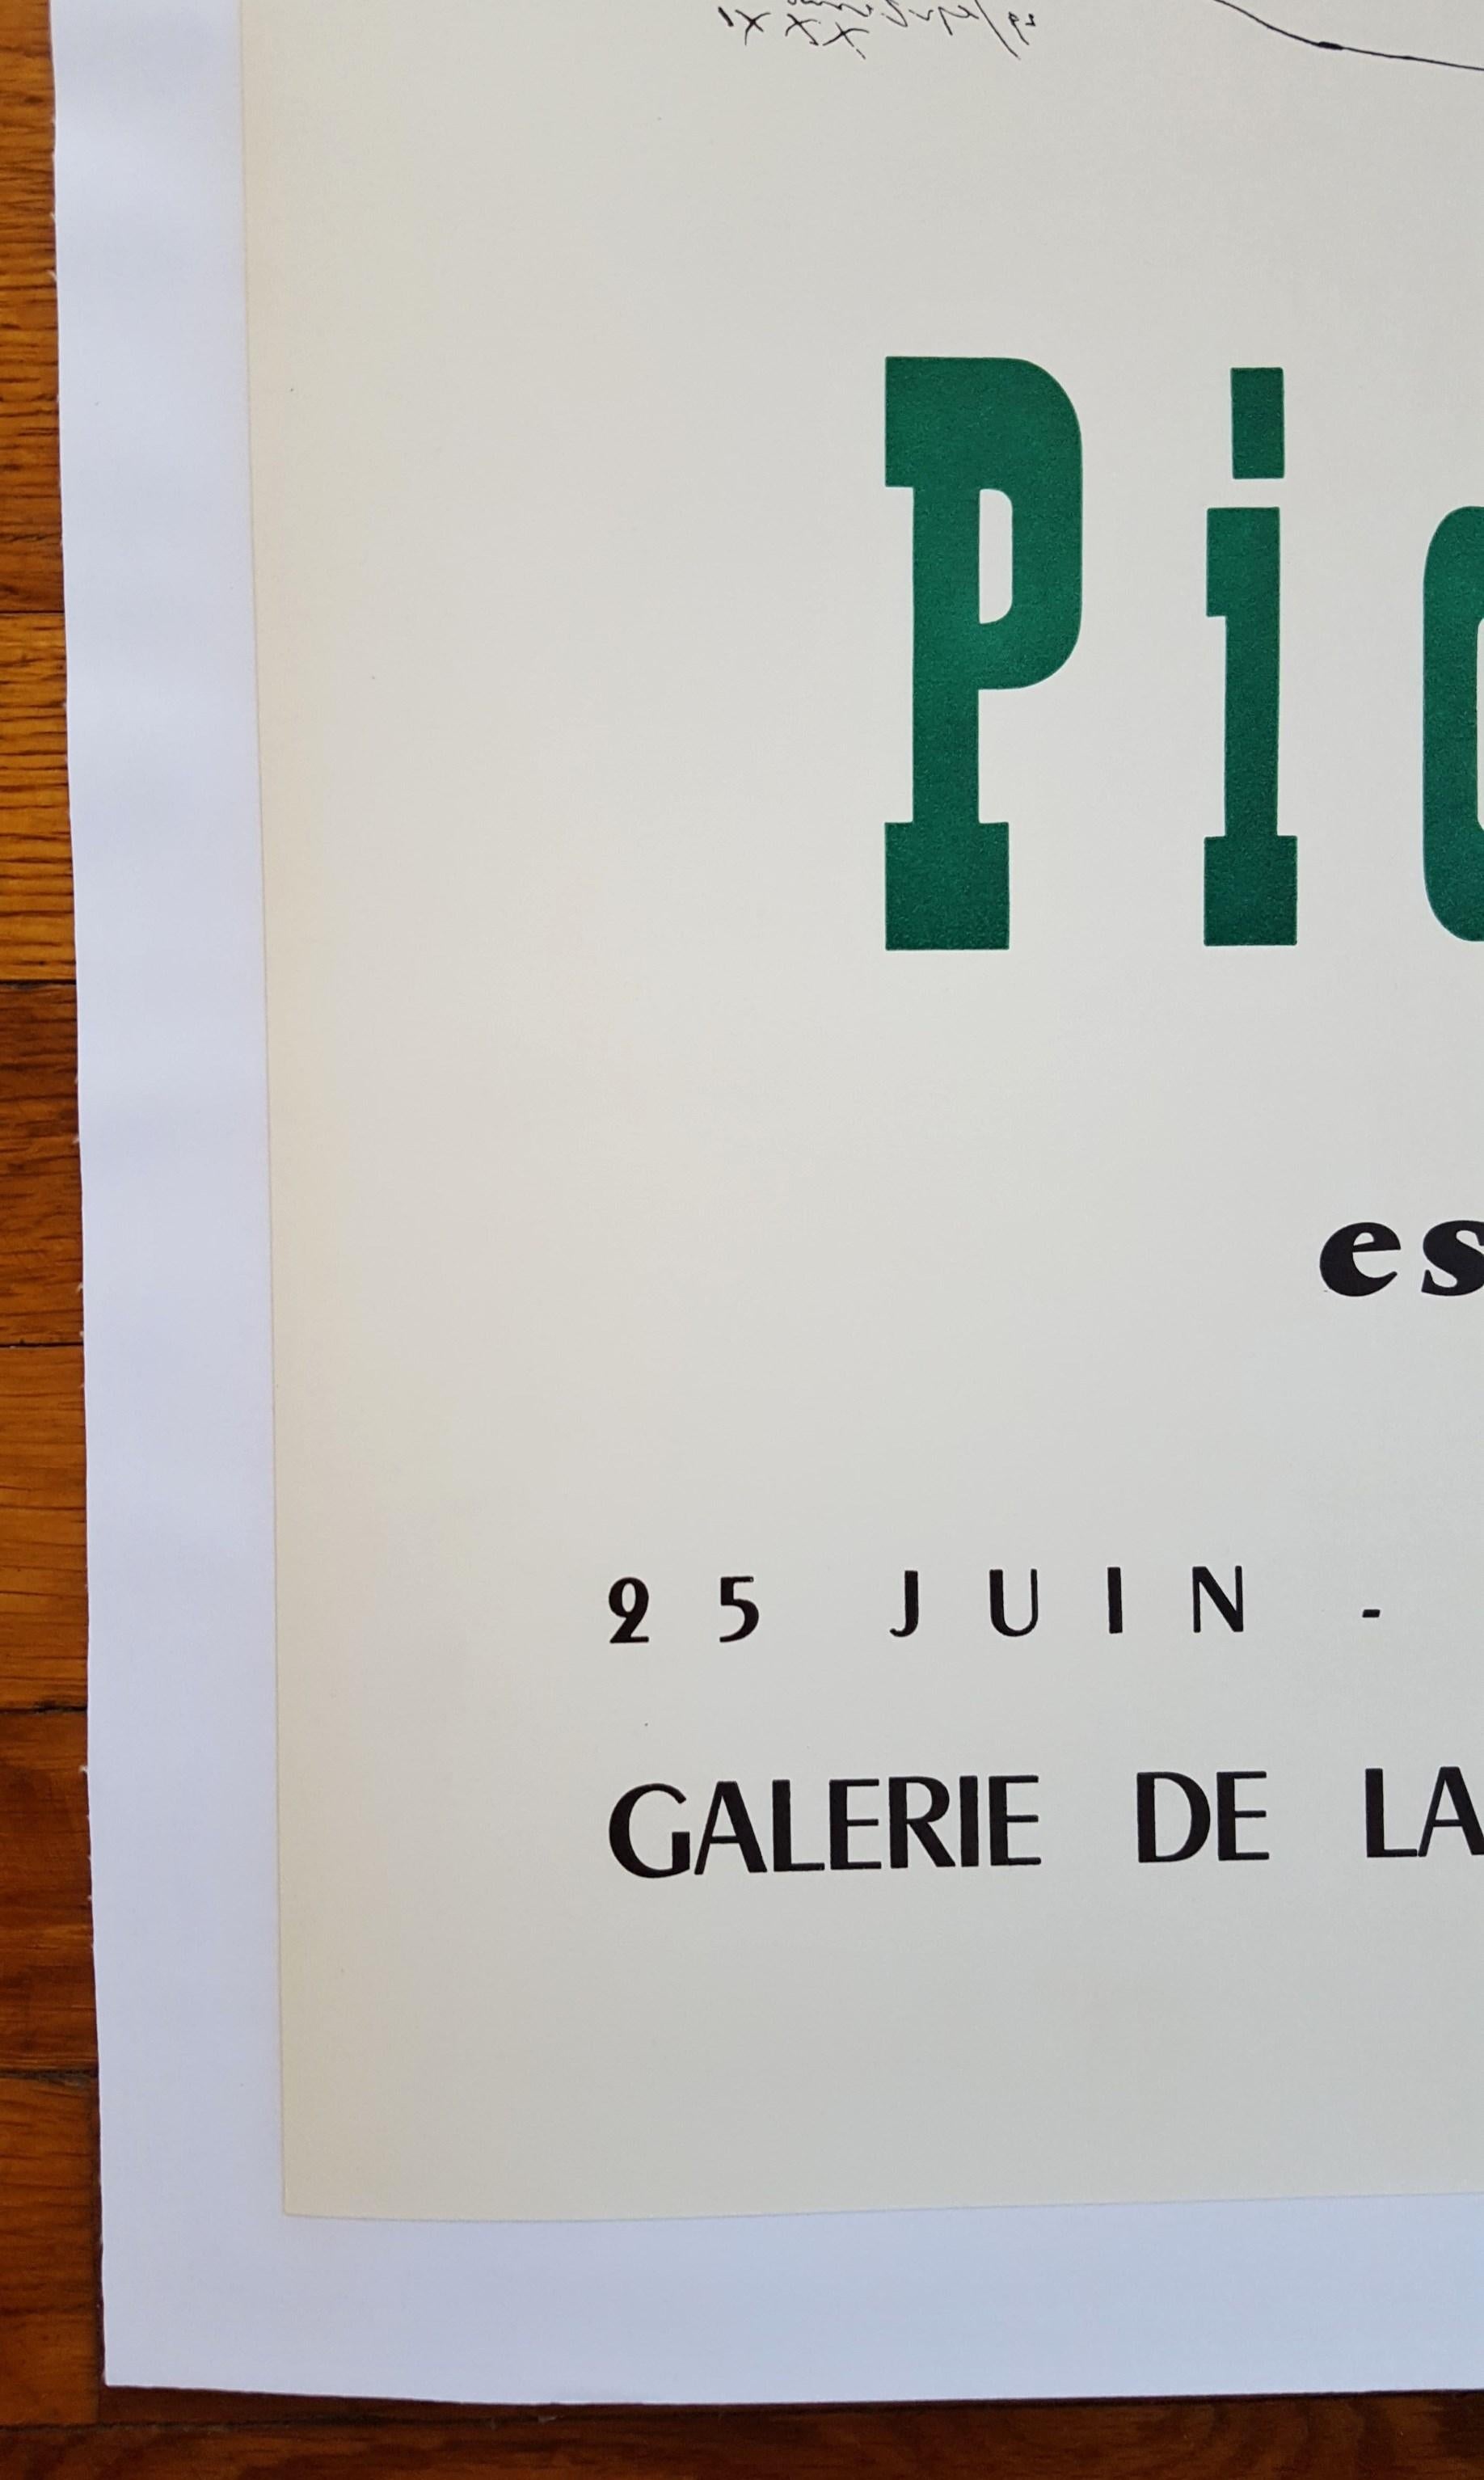 Expo 59 - Galerie de la Colombe - Print by (after) Pablo Picasso